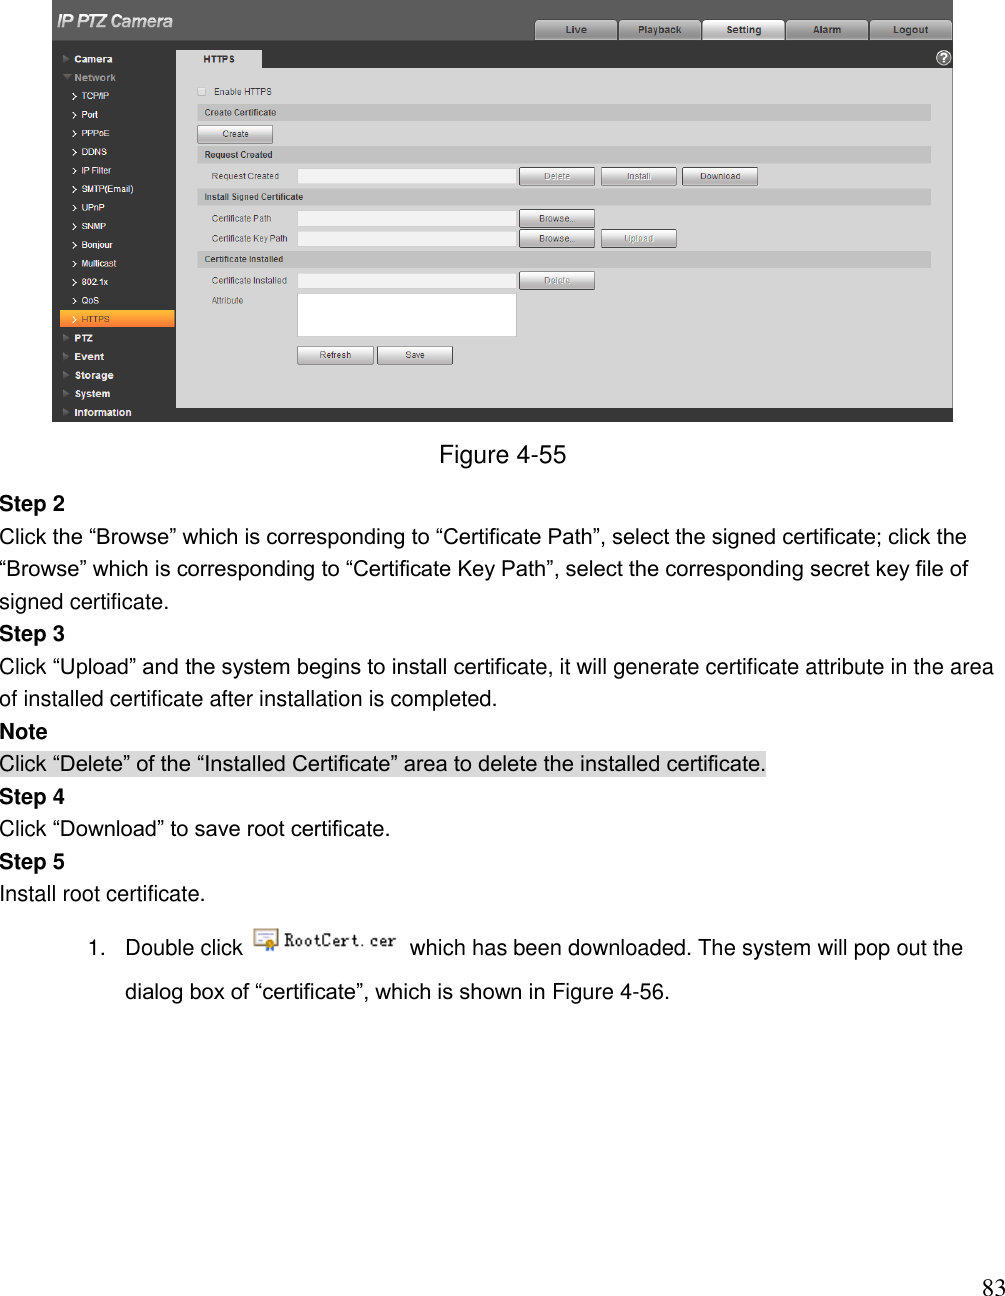                                                                              83  Figure 4-55 Step 2  Click the “Browse” which is corresponding to “Certificate Path”, select the signed certificate; click the “Browse” which is corresponding to “Certificate Key Path”, select the corresponding secret key file of signed certificate.  Step 3  Click “Upload” and the system begins to install certificate, it will generate certificate attribute in the area of installed certificate after installation is completed.  Note Click “Delete” of the “Installed Certificate” area to delete the installed certificate.  Step 4  Click “Download” to save root certificate.  Step 5  Install root certificate.  1.  Double click   which has been downloaded. The system will pop out the dialog box of “certificate”, which is shown in Figure 4-56.  